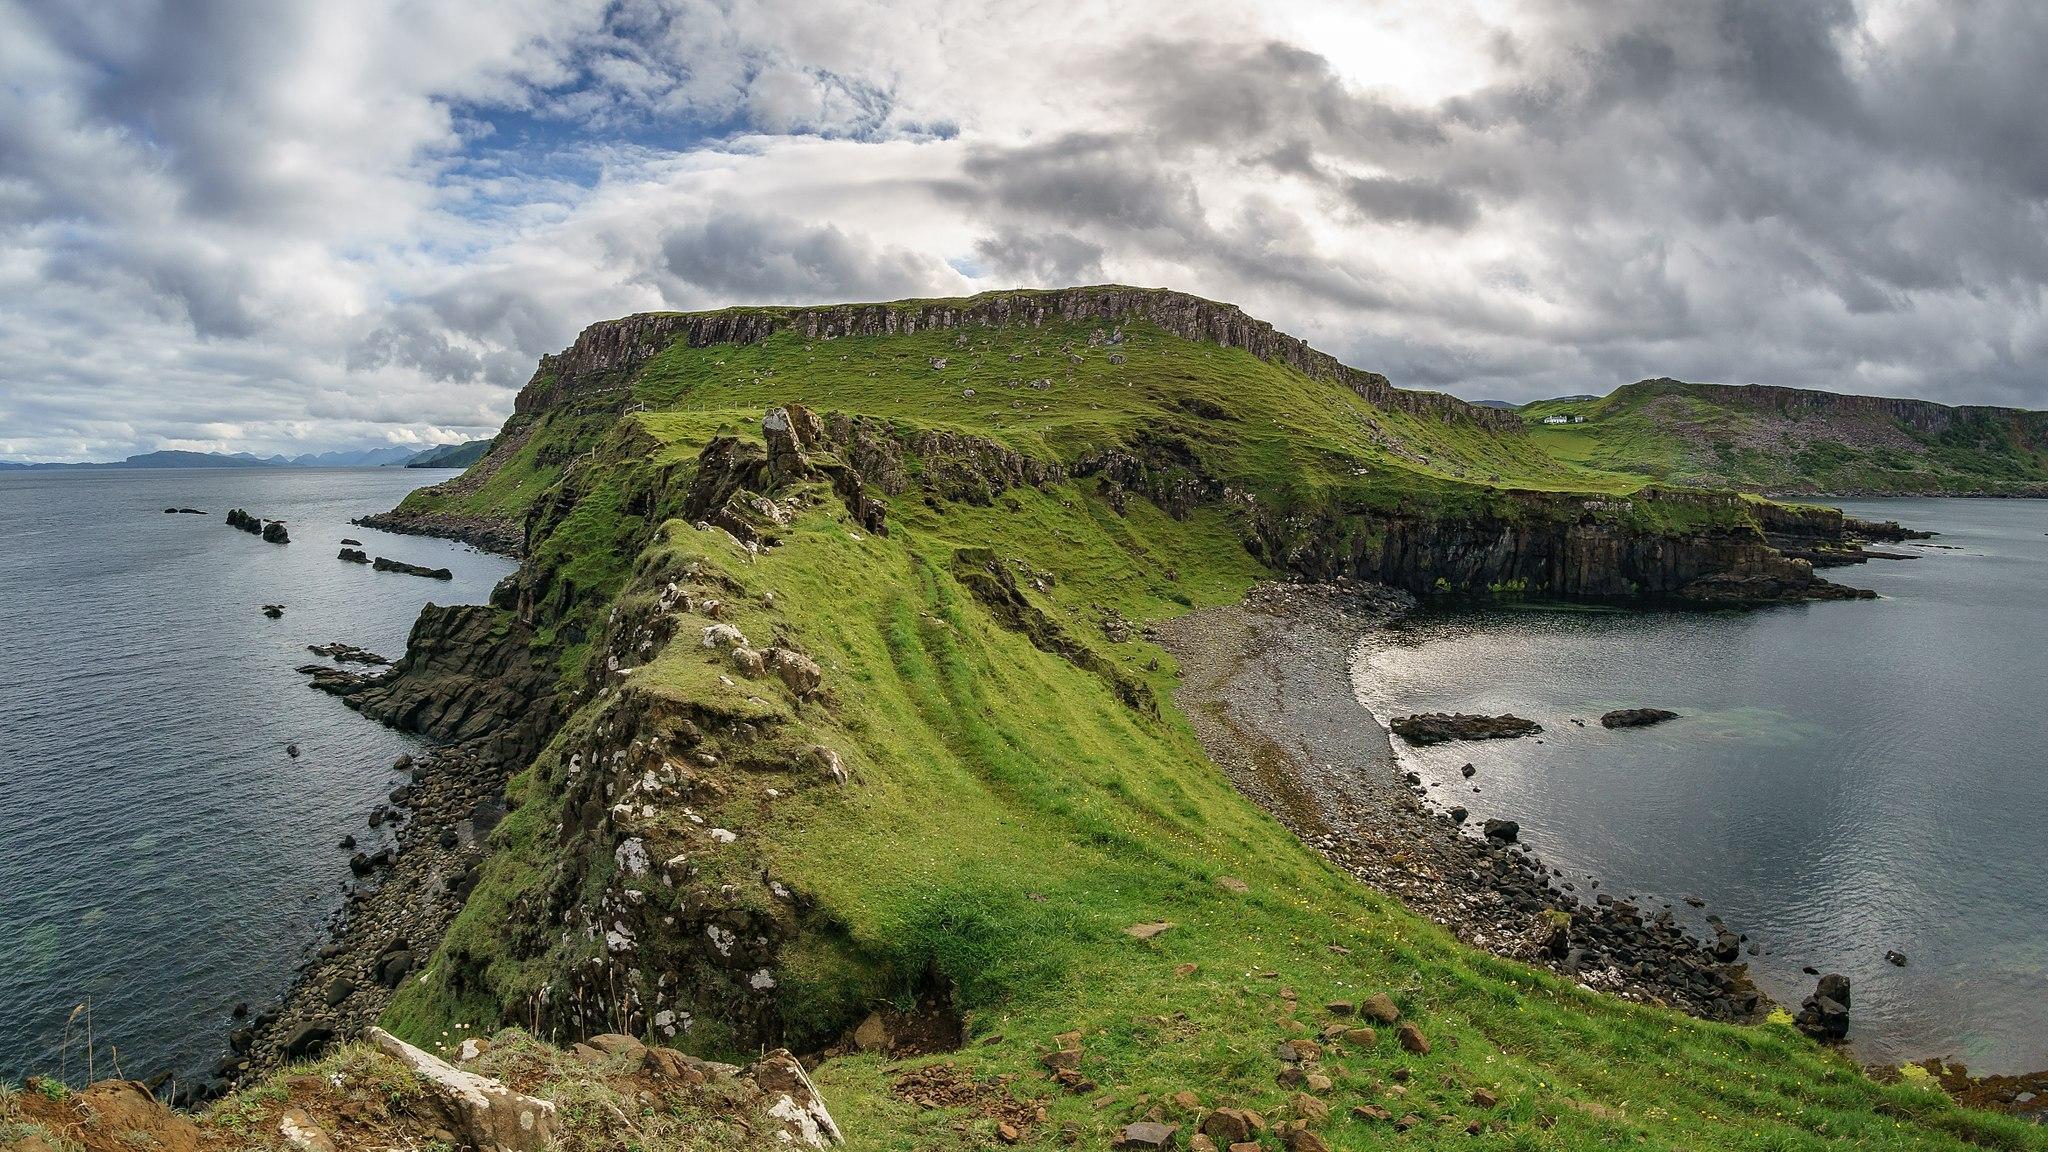 The island has an indented coastline of peninsulas and narrow lochs, radiating out from a mountainous interior